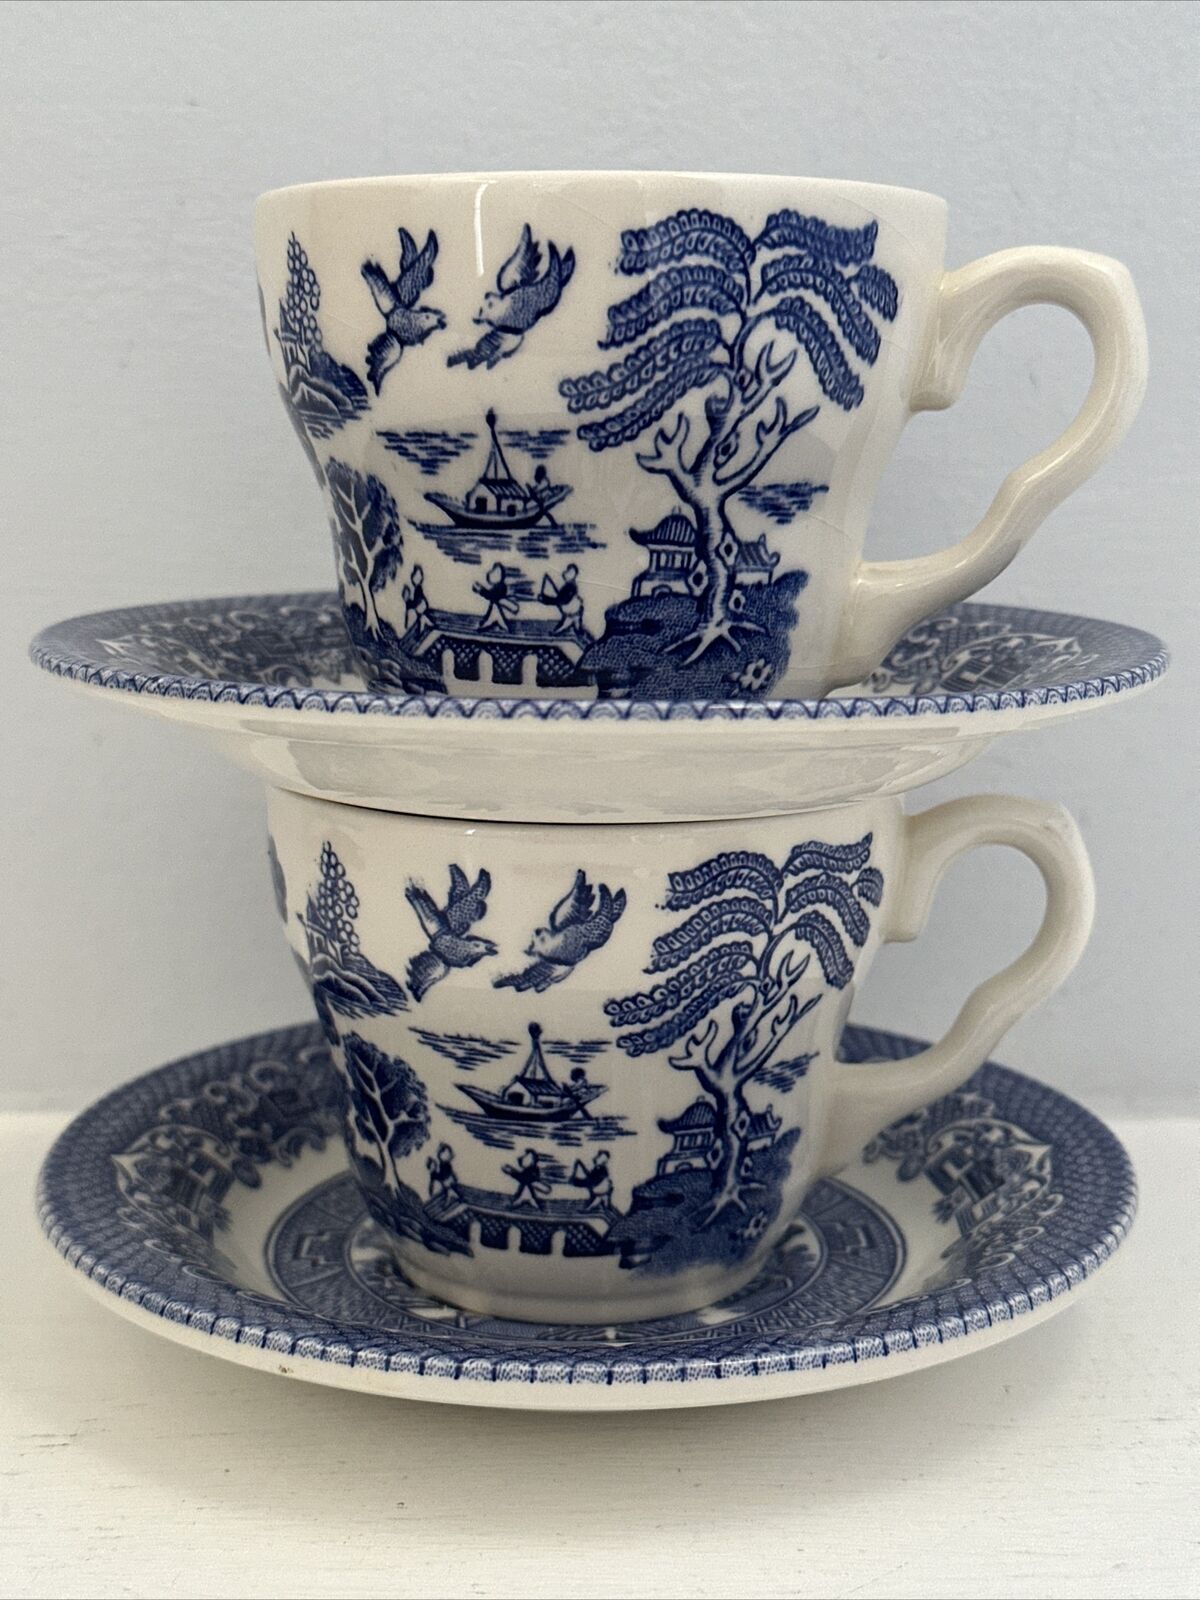 2 BLUE WILLOW EIT England Ironstone Cups and Saucers SET, PRISTINE